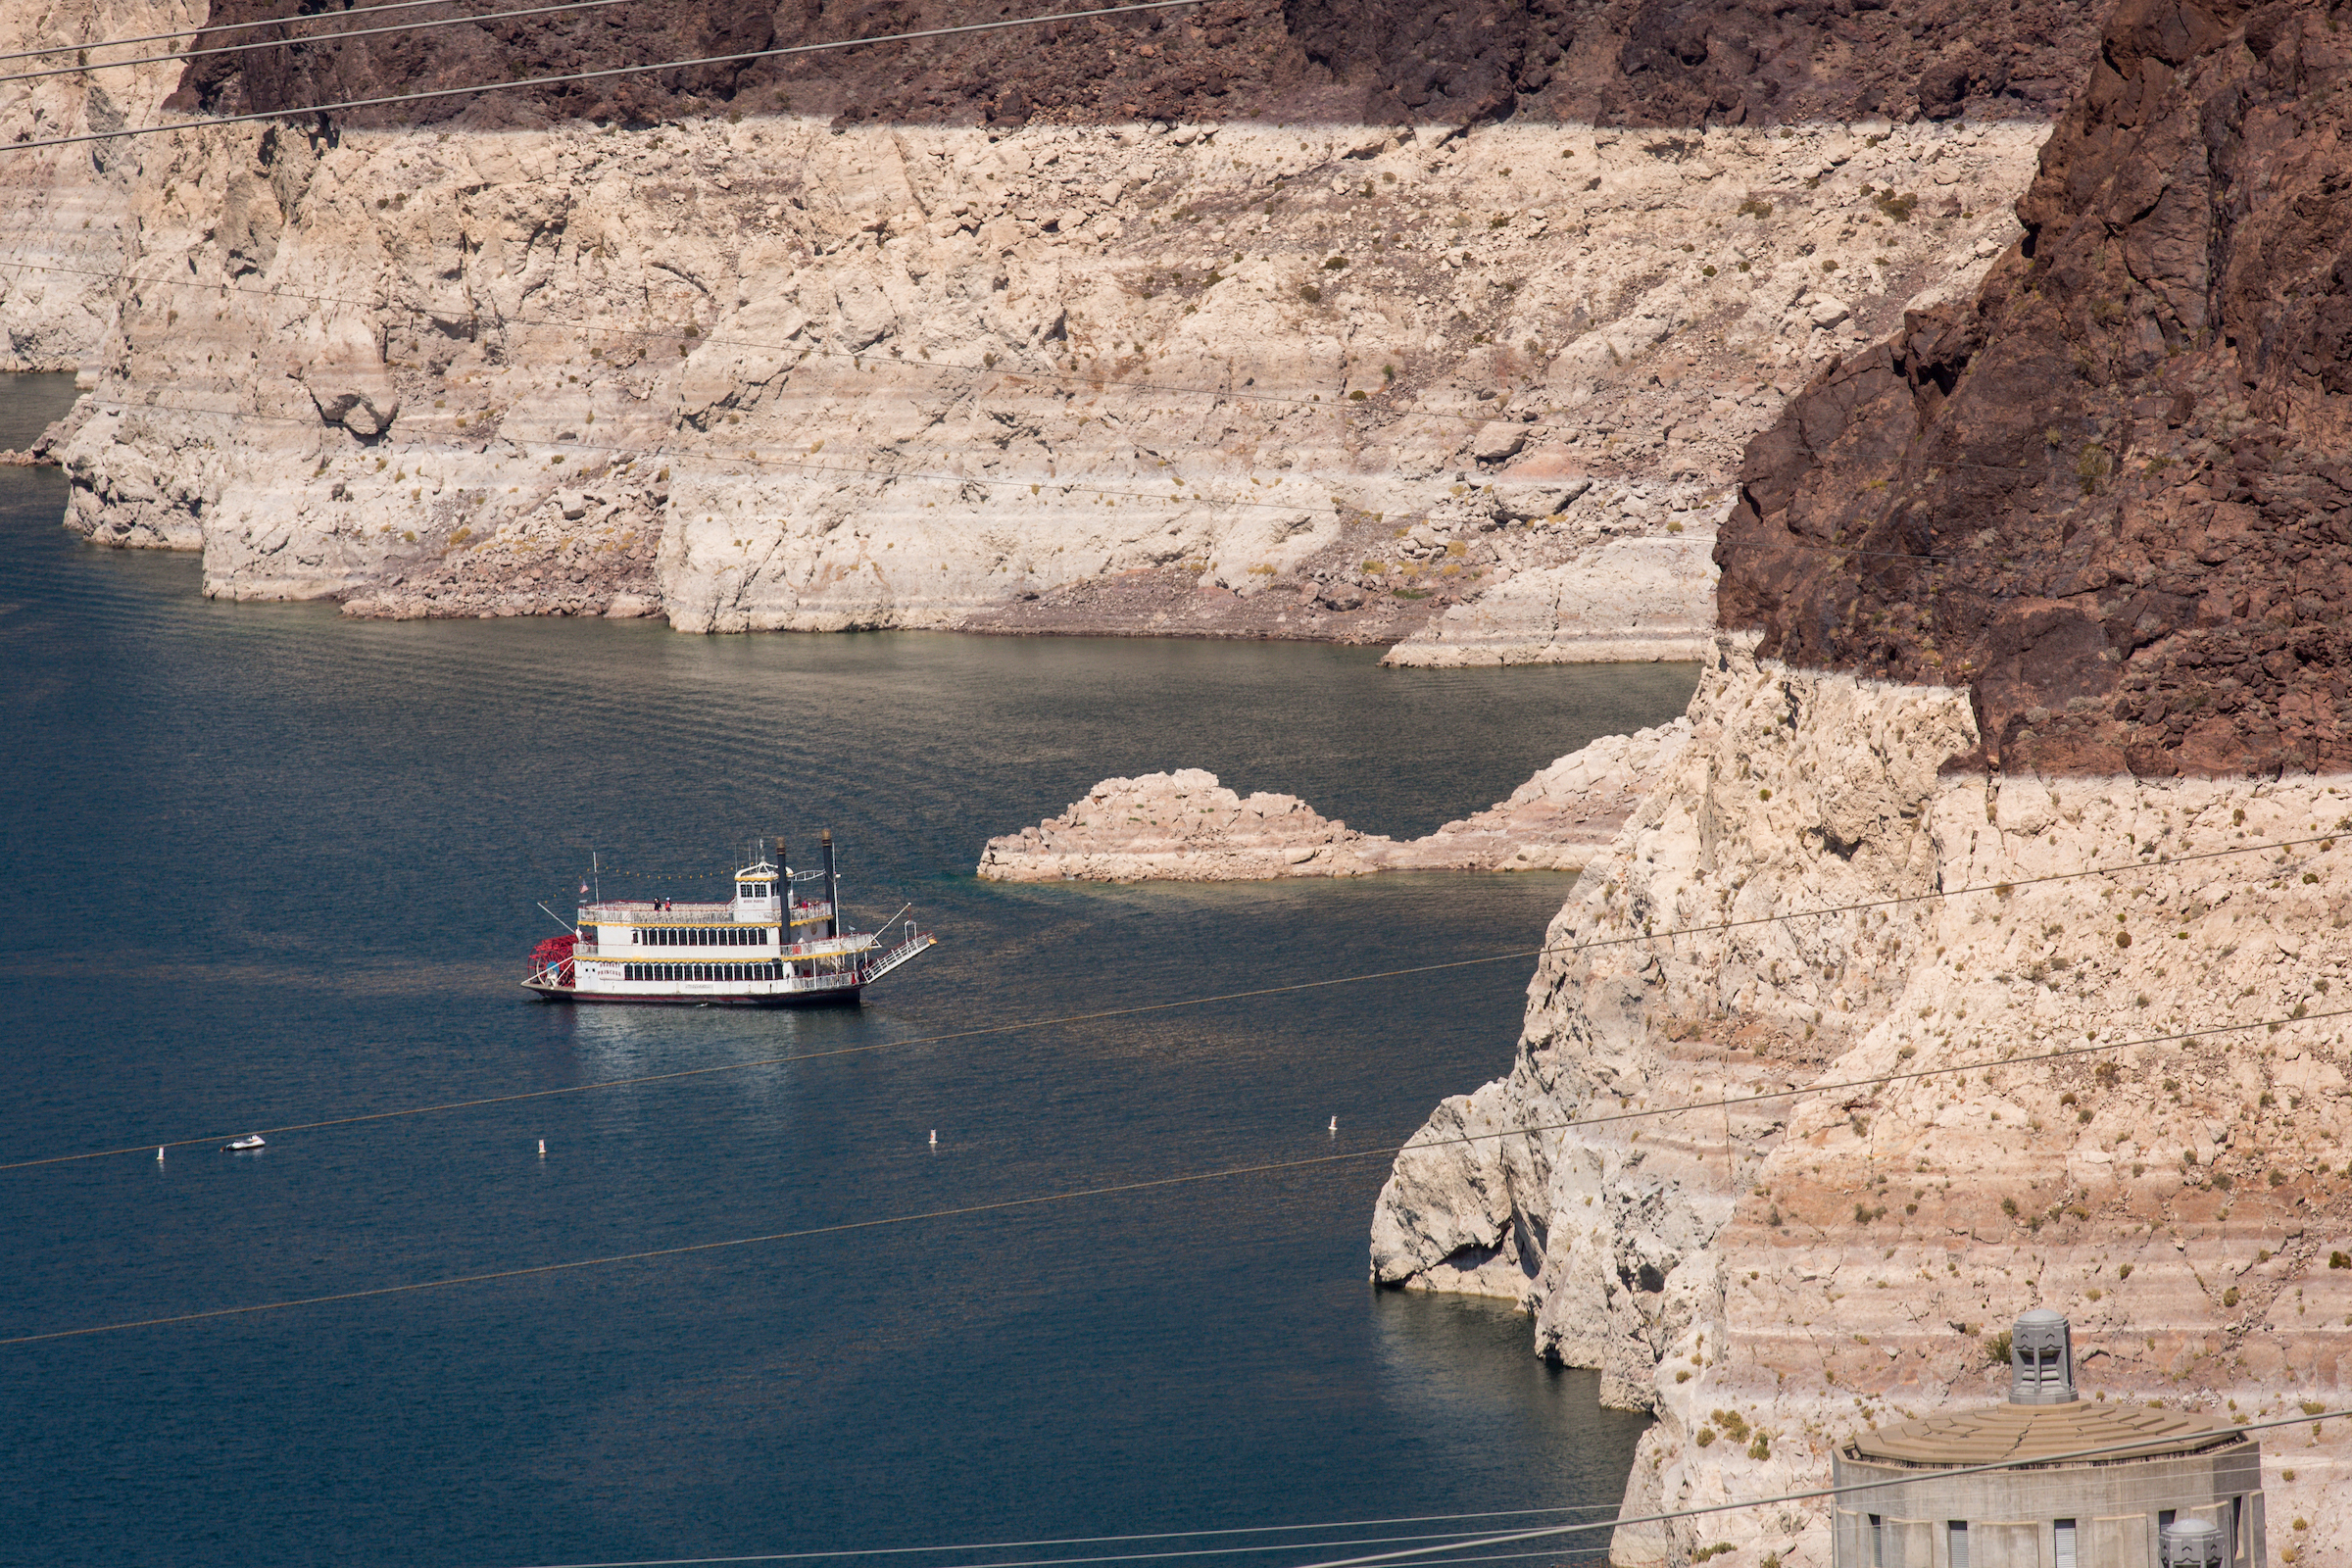 A tourist boat travels around Lake Mead.